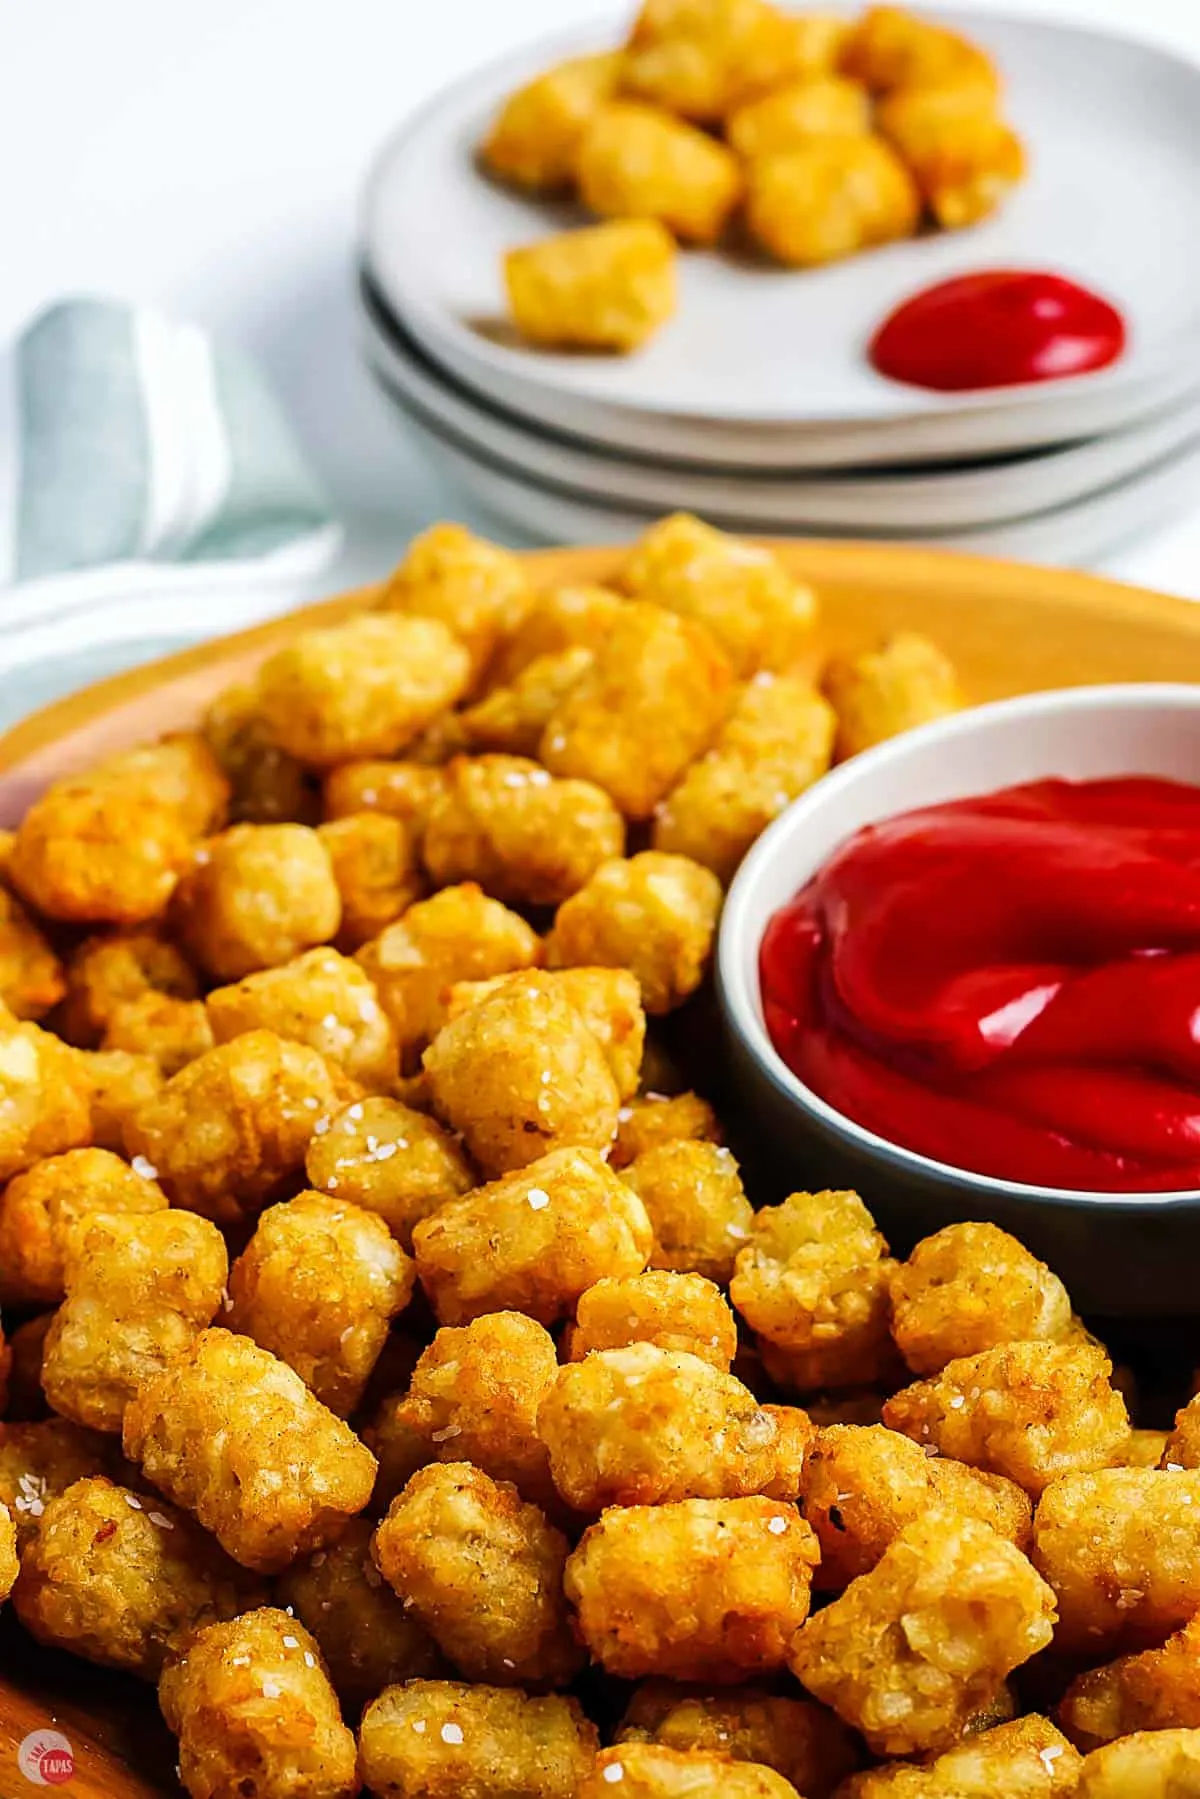 tots on a platter with ketchup